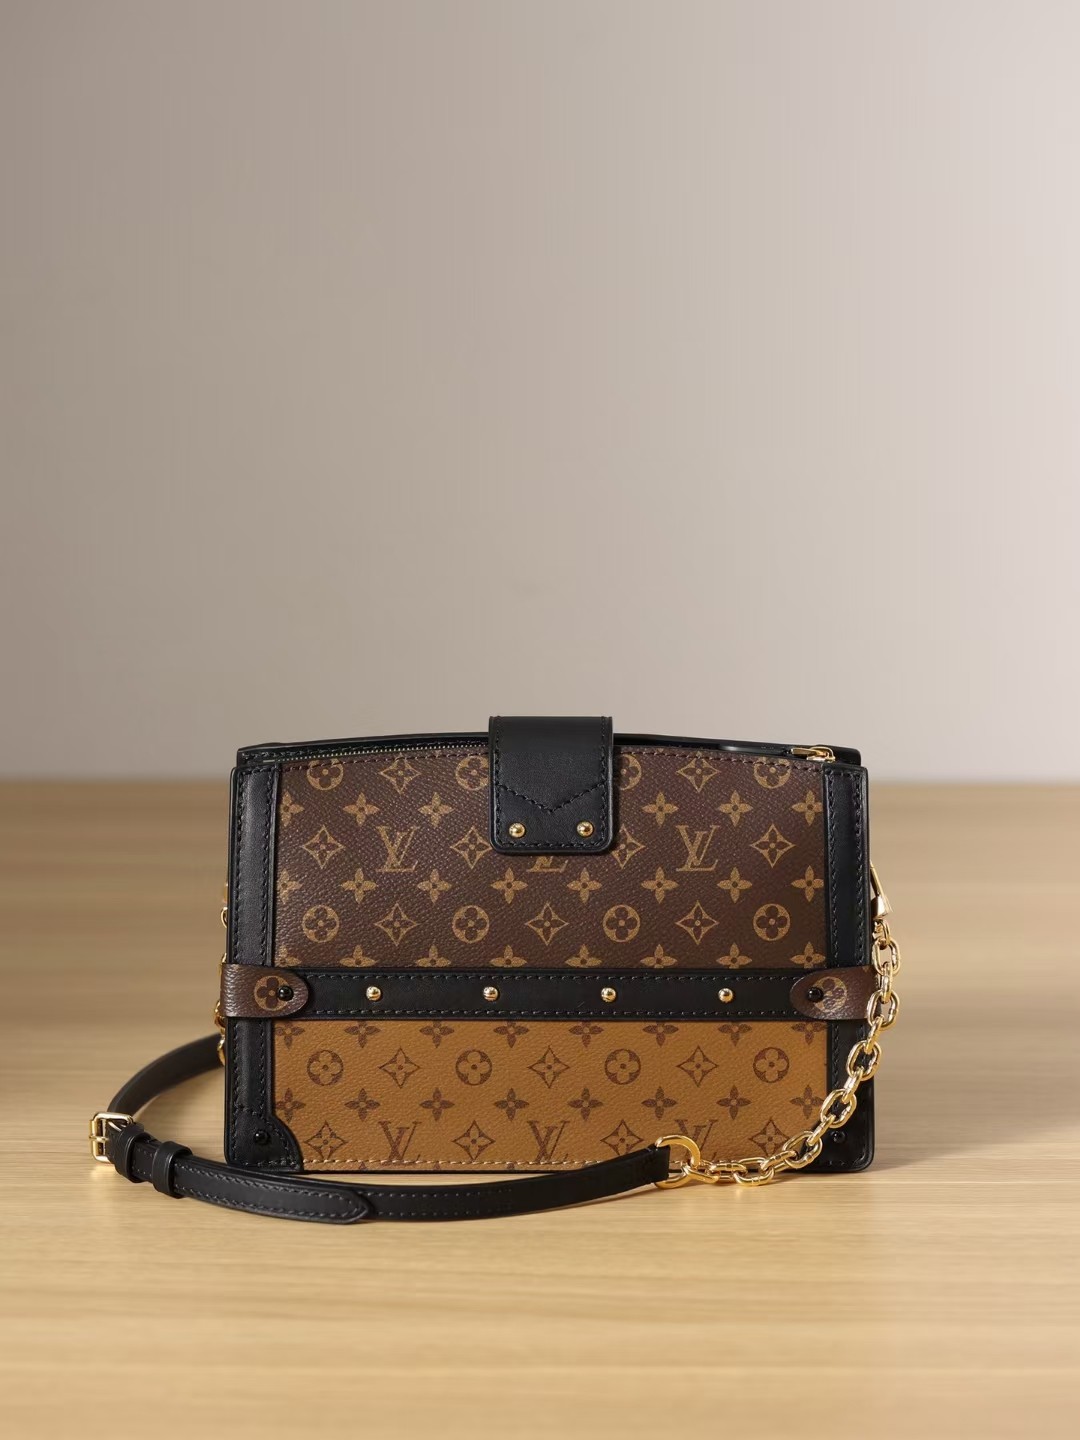 Louis Vuitton stores can not buy, why I buy top replica M43596 TRUNK CLUTCH bags? (2022 updated))-Best Quality Fake designer Bag Review, Replica designer bag ru